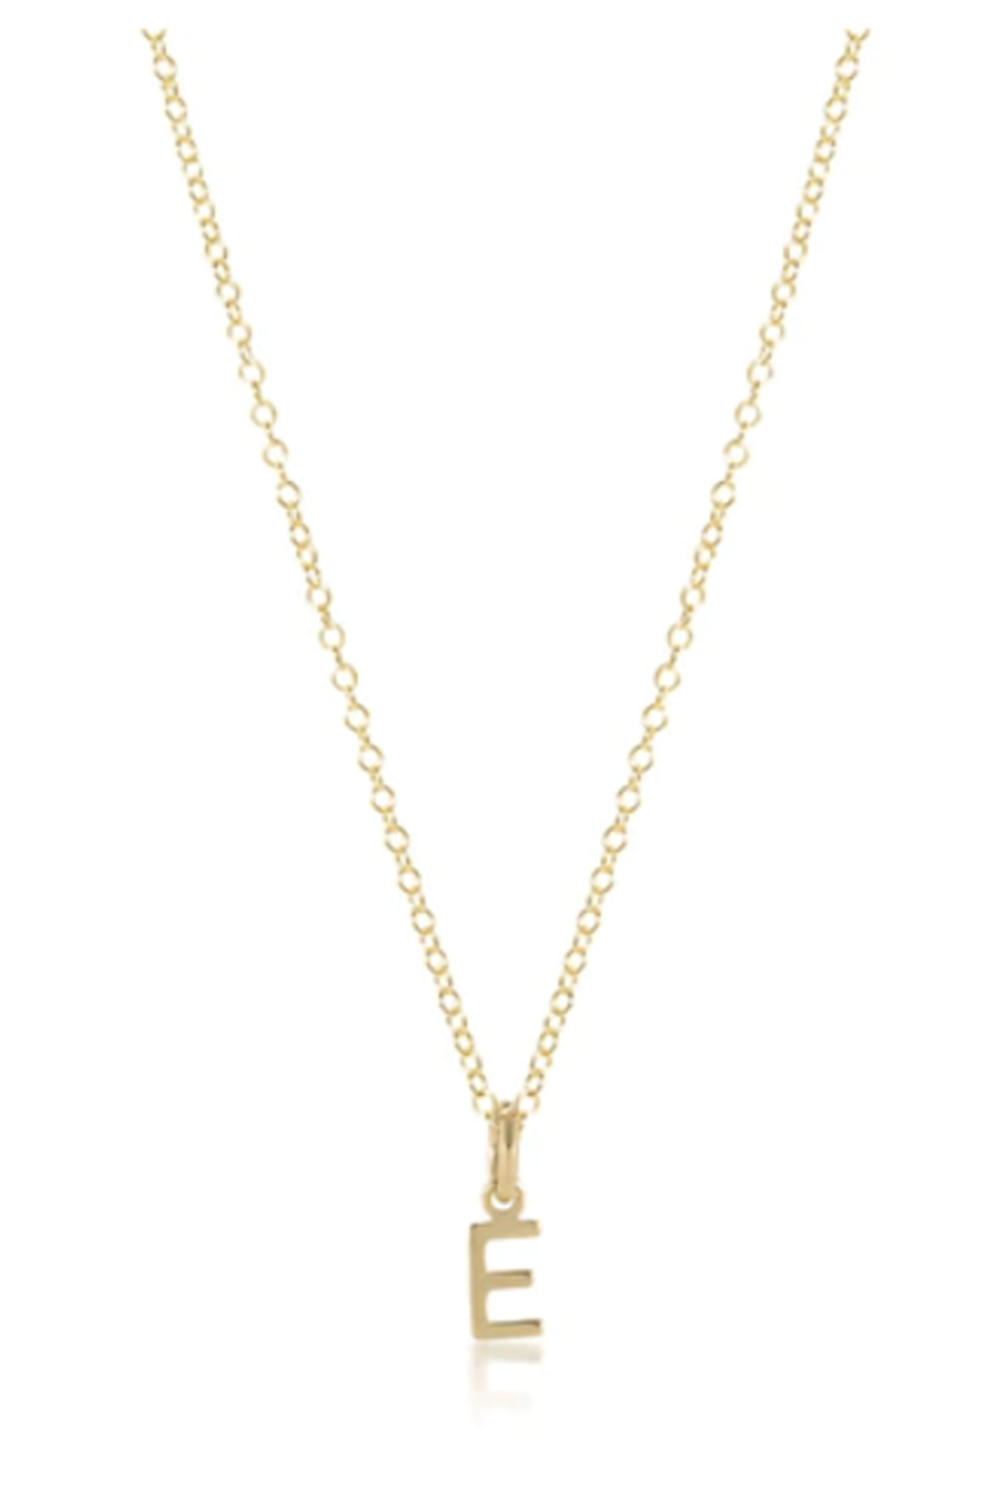 EN Respect Outlined Initial Necklace